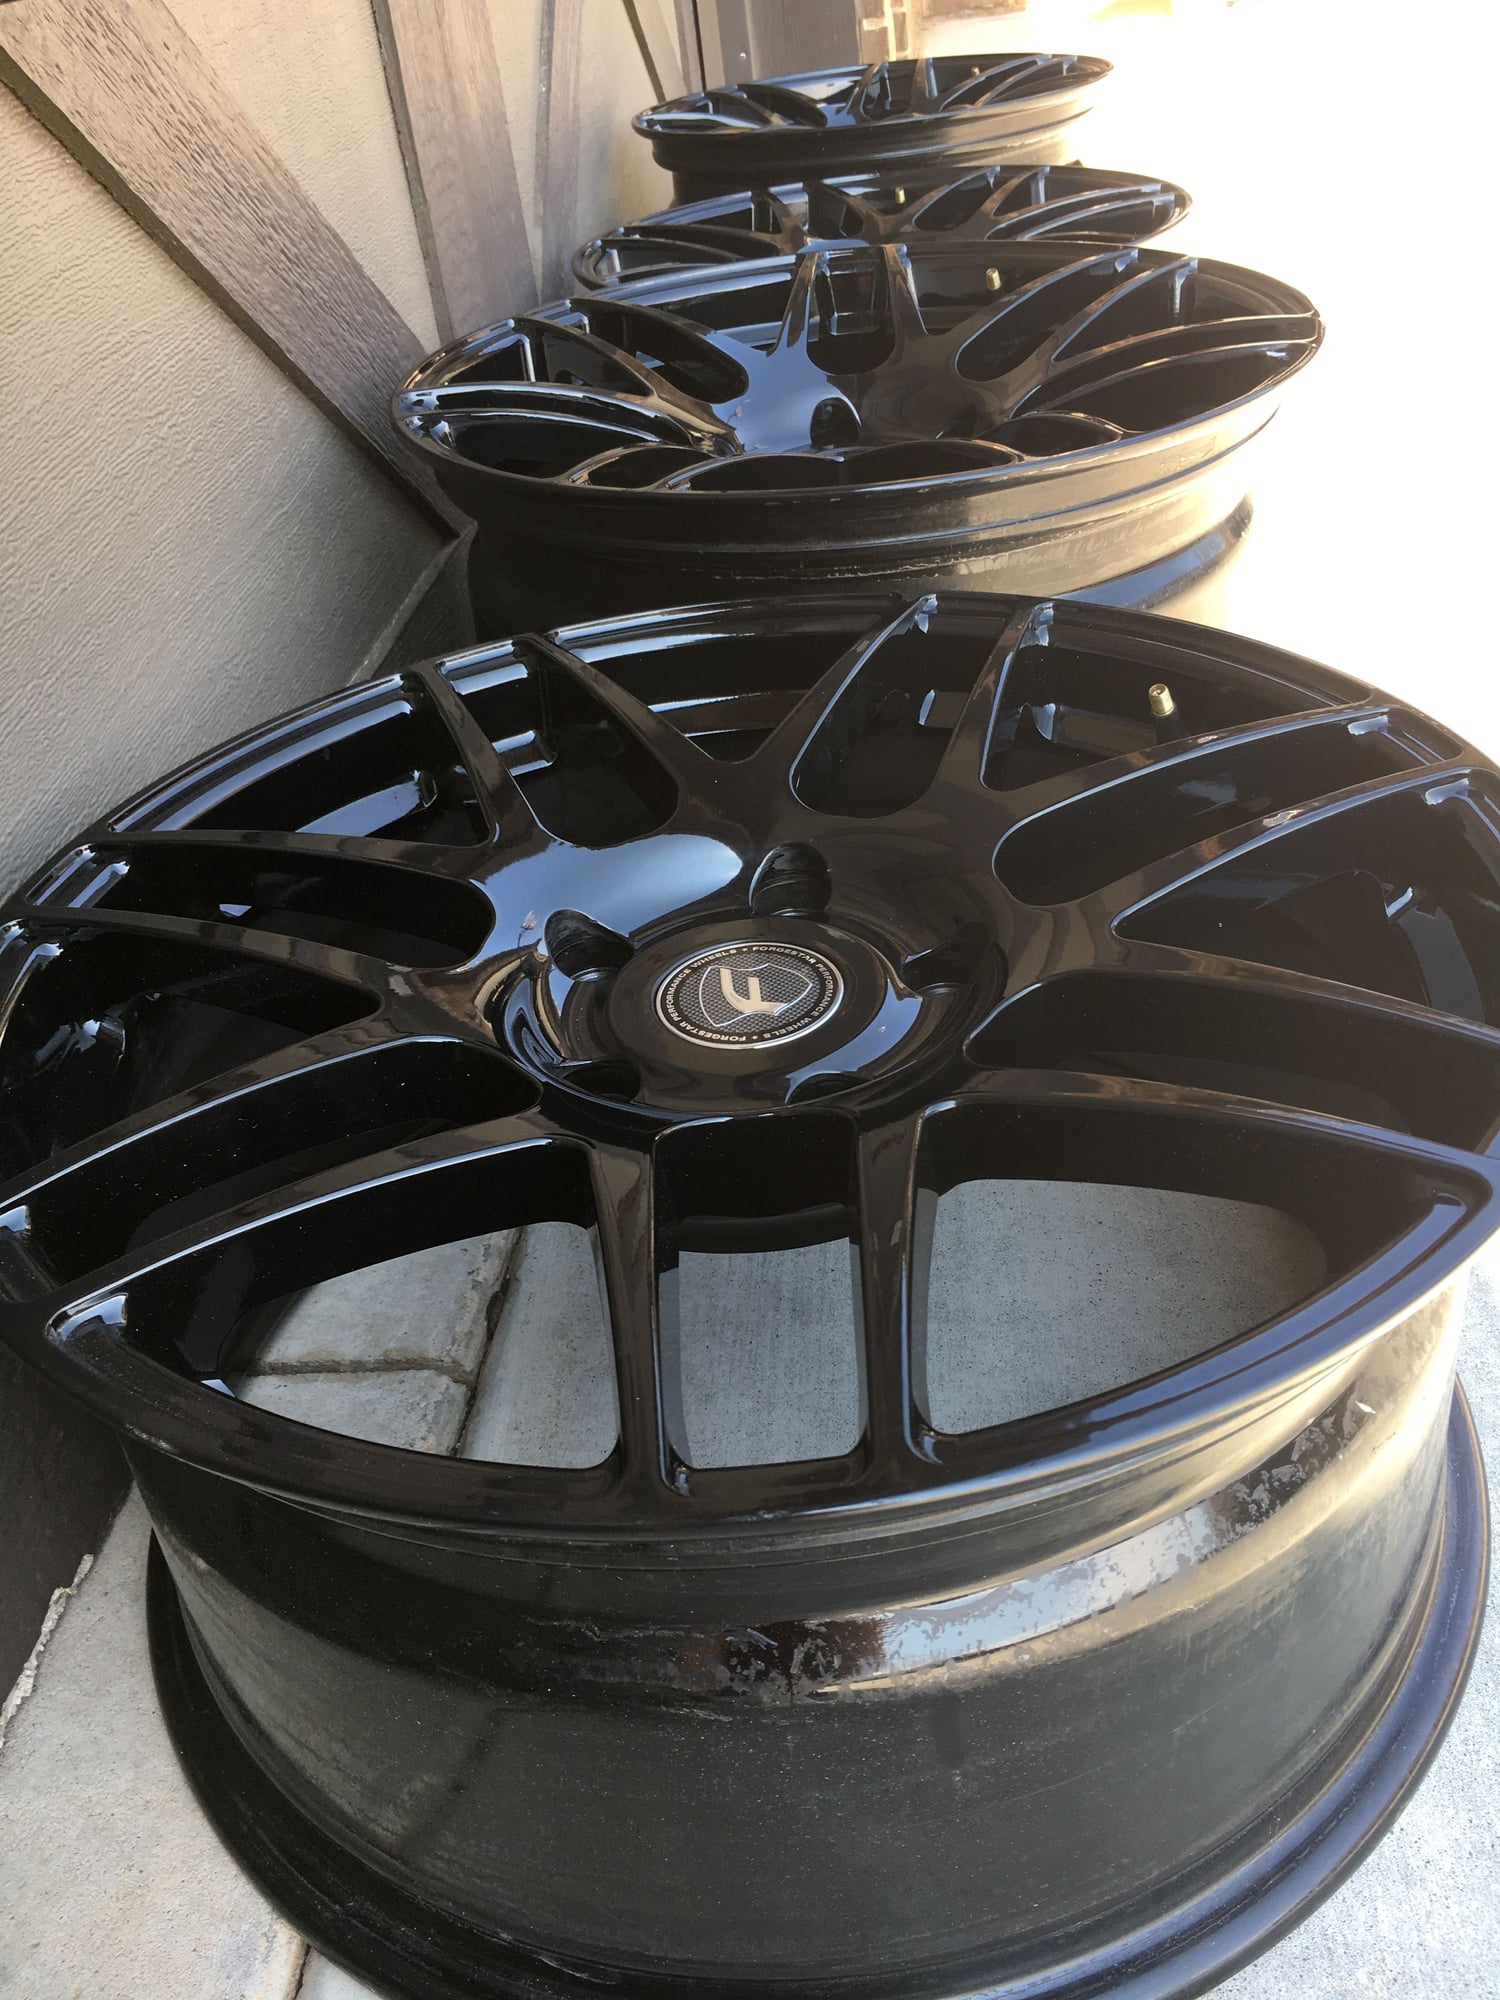 Wheels and Tires/Axles - brand new Forgestar F14 18x8.5/10 - New - Oklahoma City, OK 73099, United States